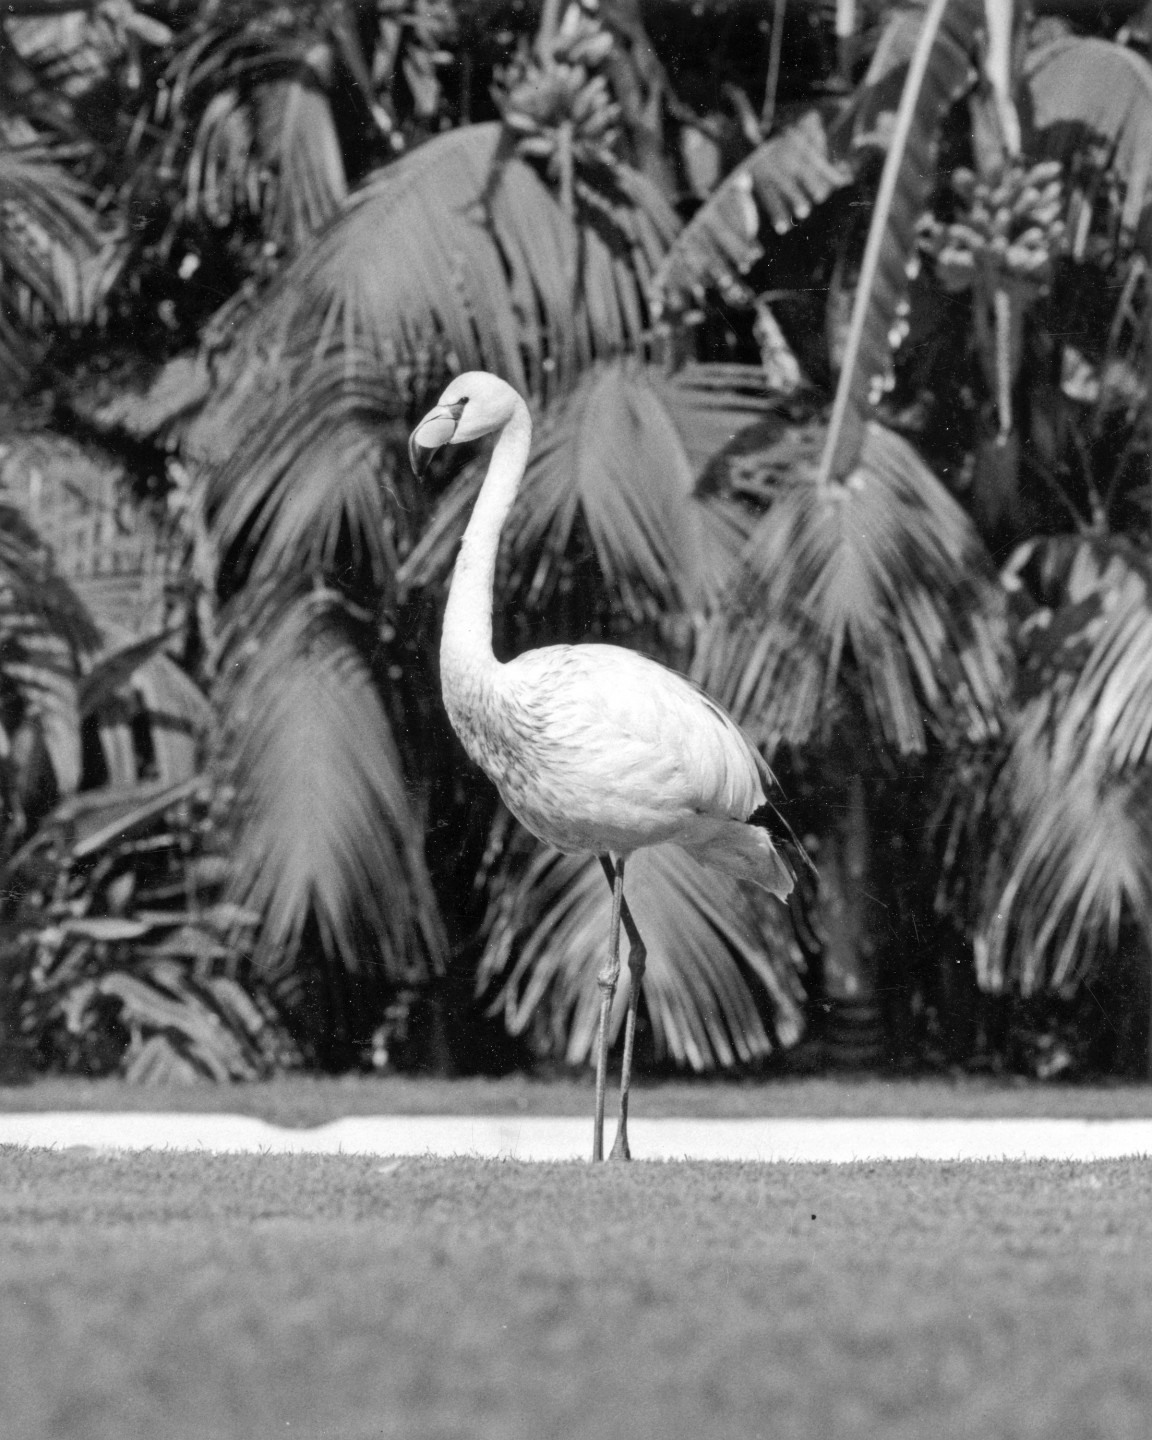 With the addition of the James's flamingo in 1964, the San Diego Zoo could boast having five of the six living types of flamingos. The James's flamingo is the smallest and rarest of the New World flamingos, native to the Andes. For many years it was believed to be extinct, until in 1960, William Conway, director of the New York Zoological Garden at the time, brought the first live bird to be seen in man years out of South America.